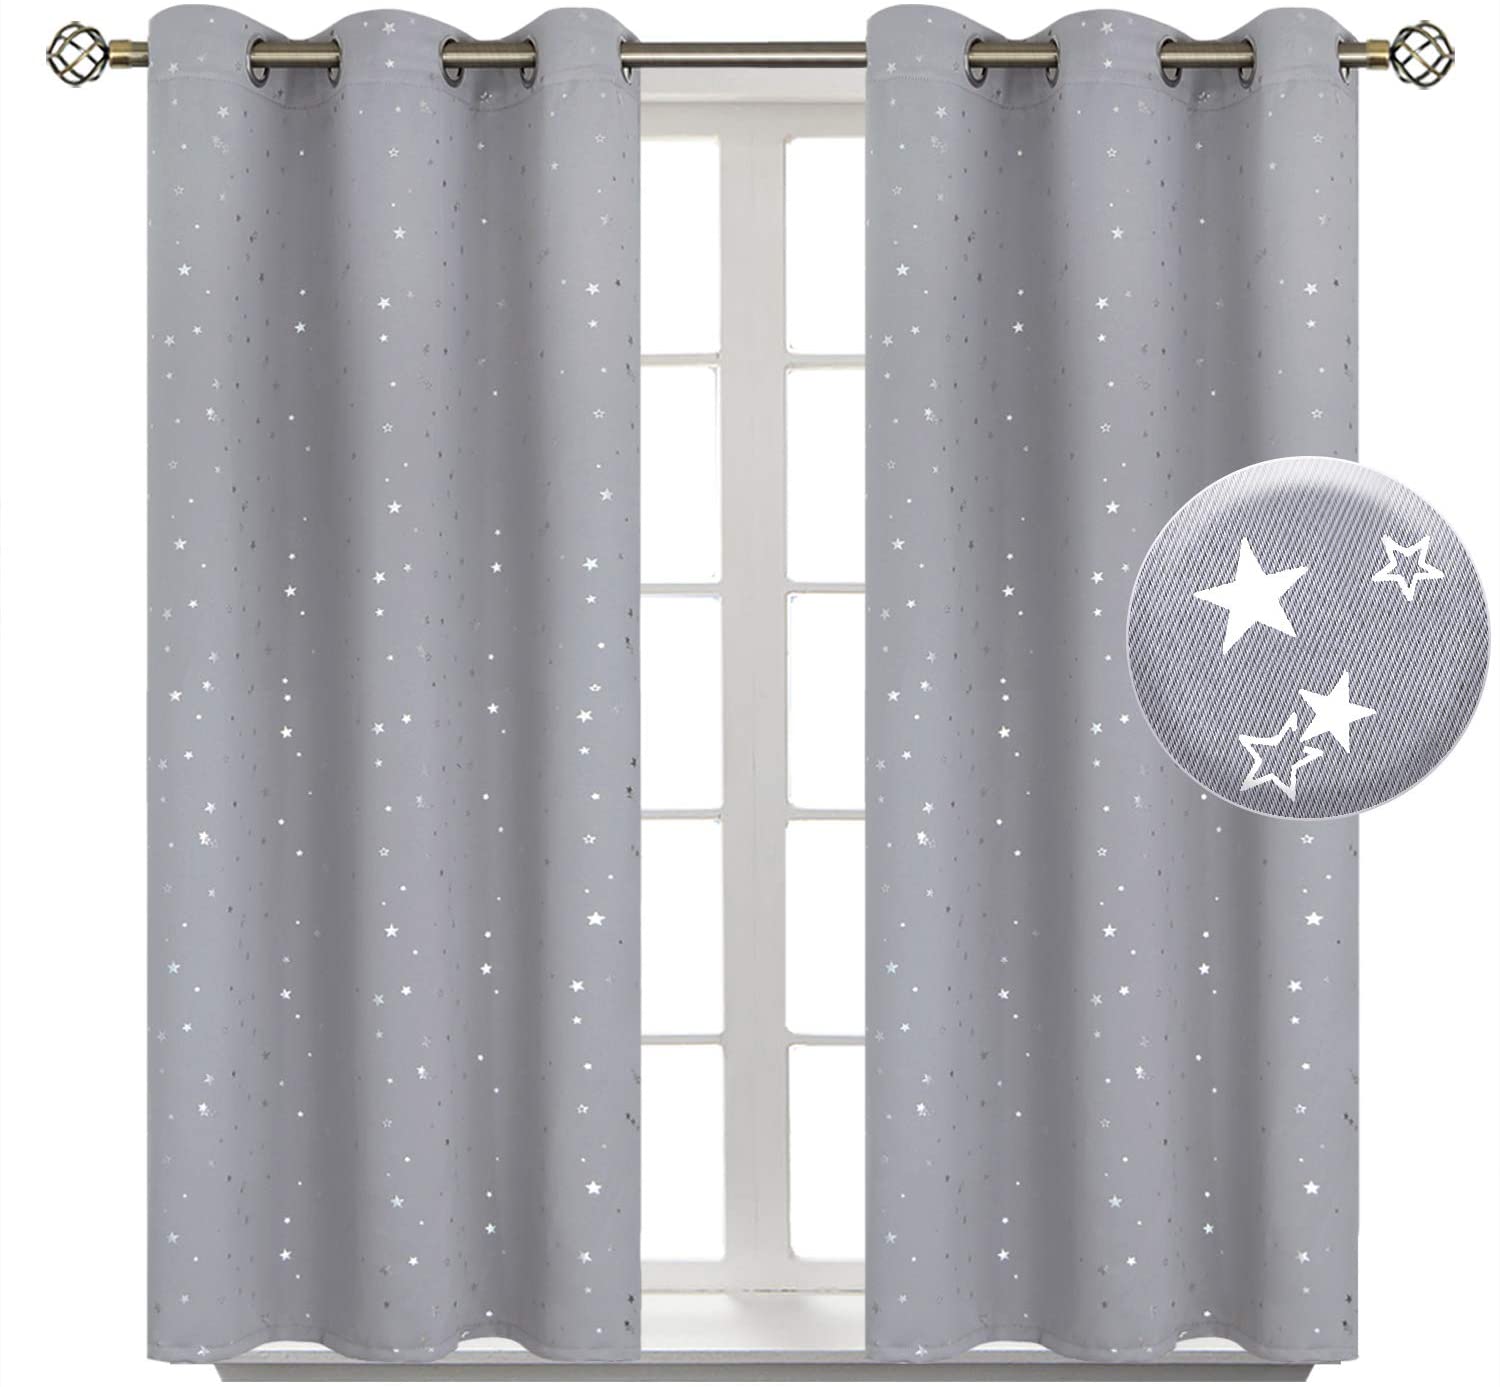 BGment Kids Blackout Curtains for Bedroom Grommet Thermal Insulated Silver Sta